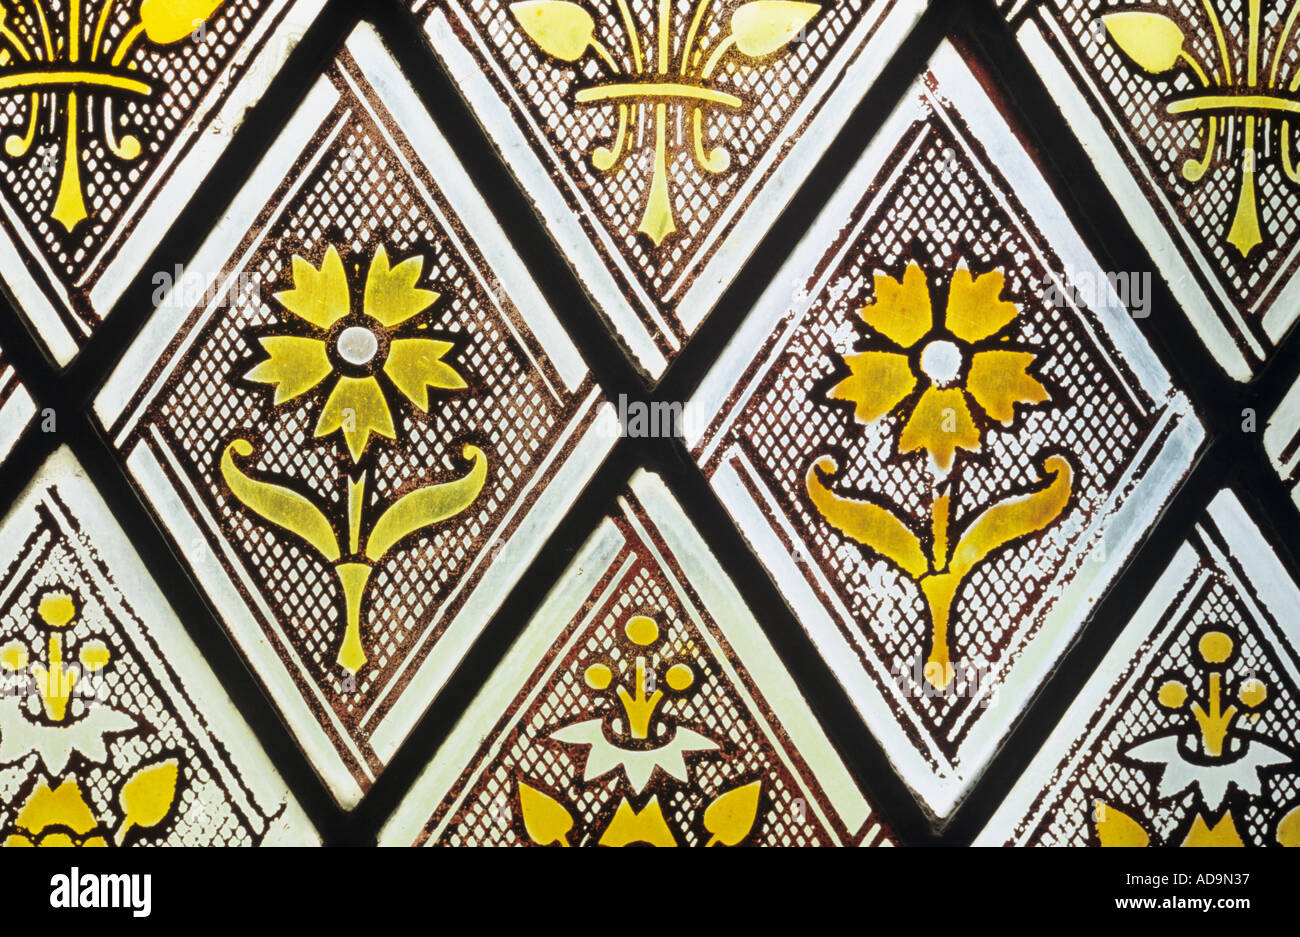 Close up of repeating flower icons in diamond shaped panes as used in Victorian stained glass windows Stock Photo